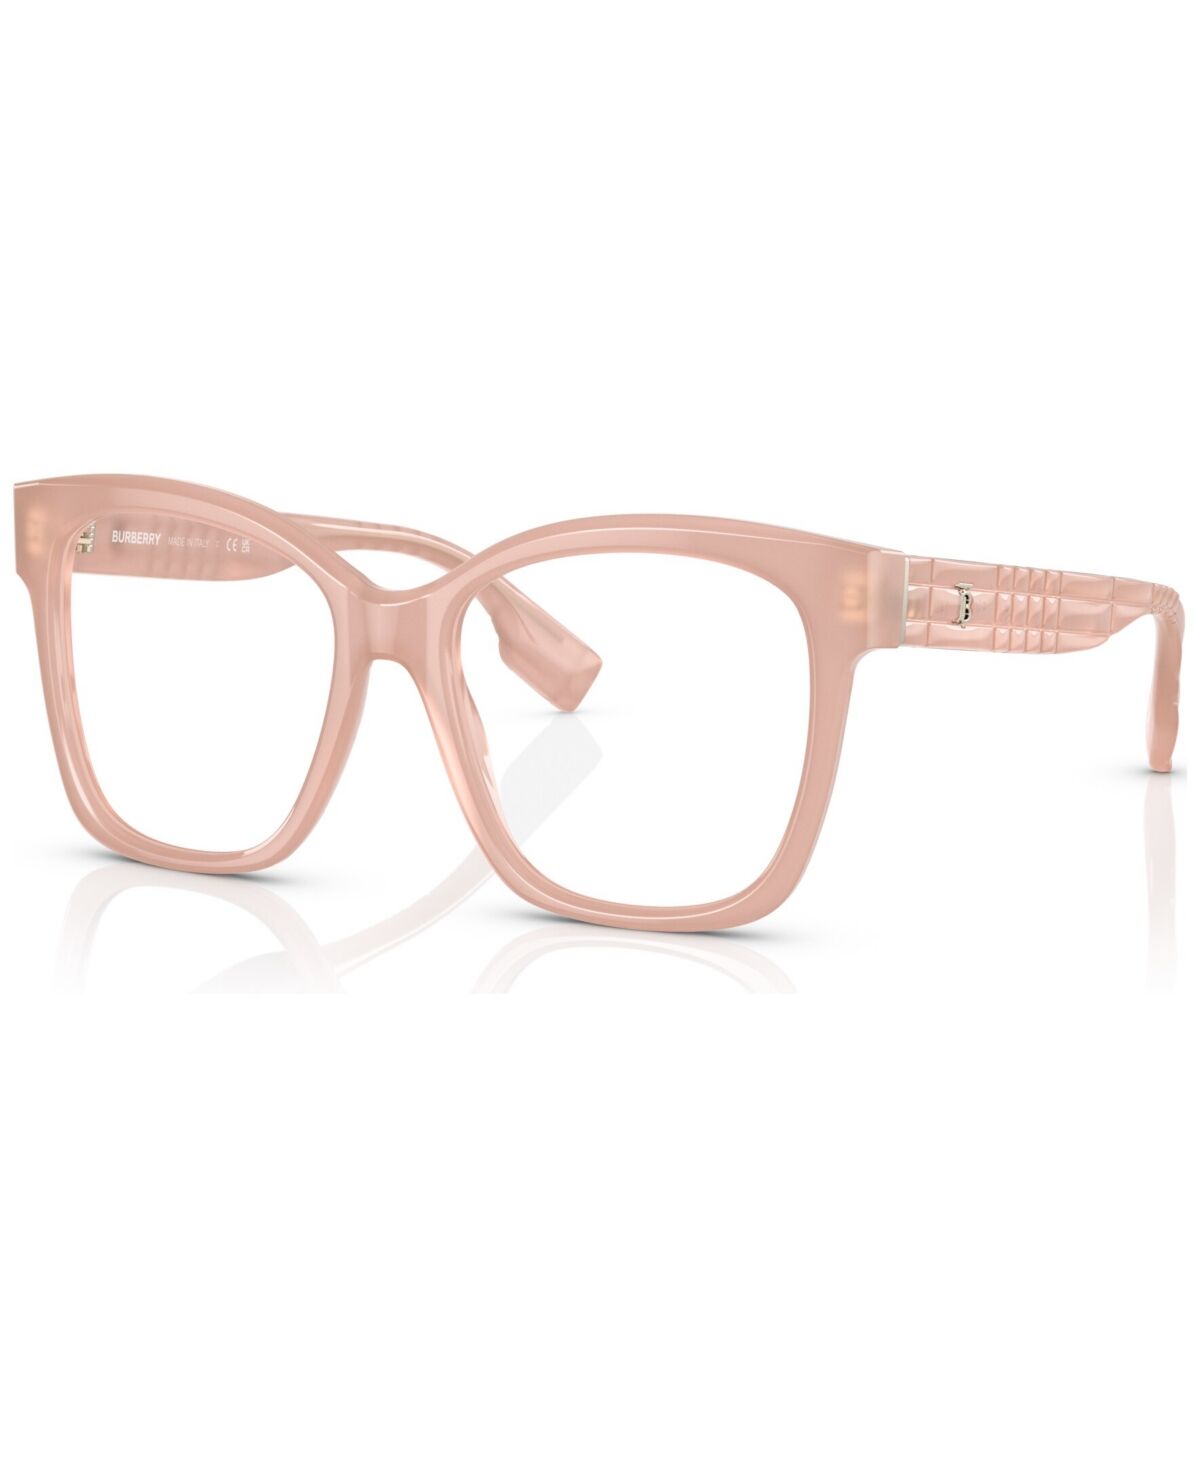 Burberry Women's Square Eyeglasses, BE236353-o - Pink